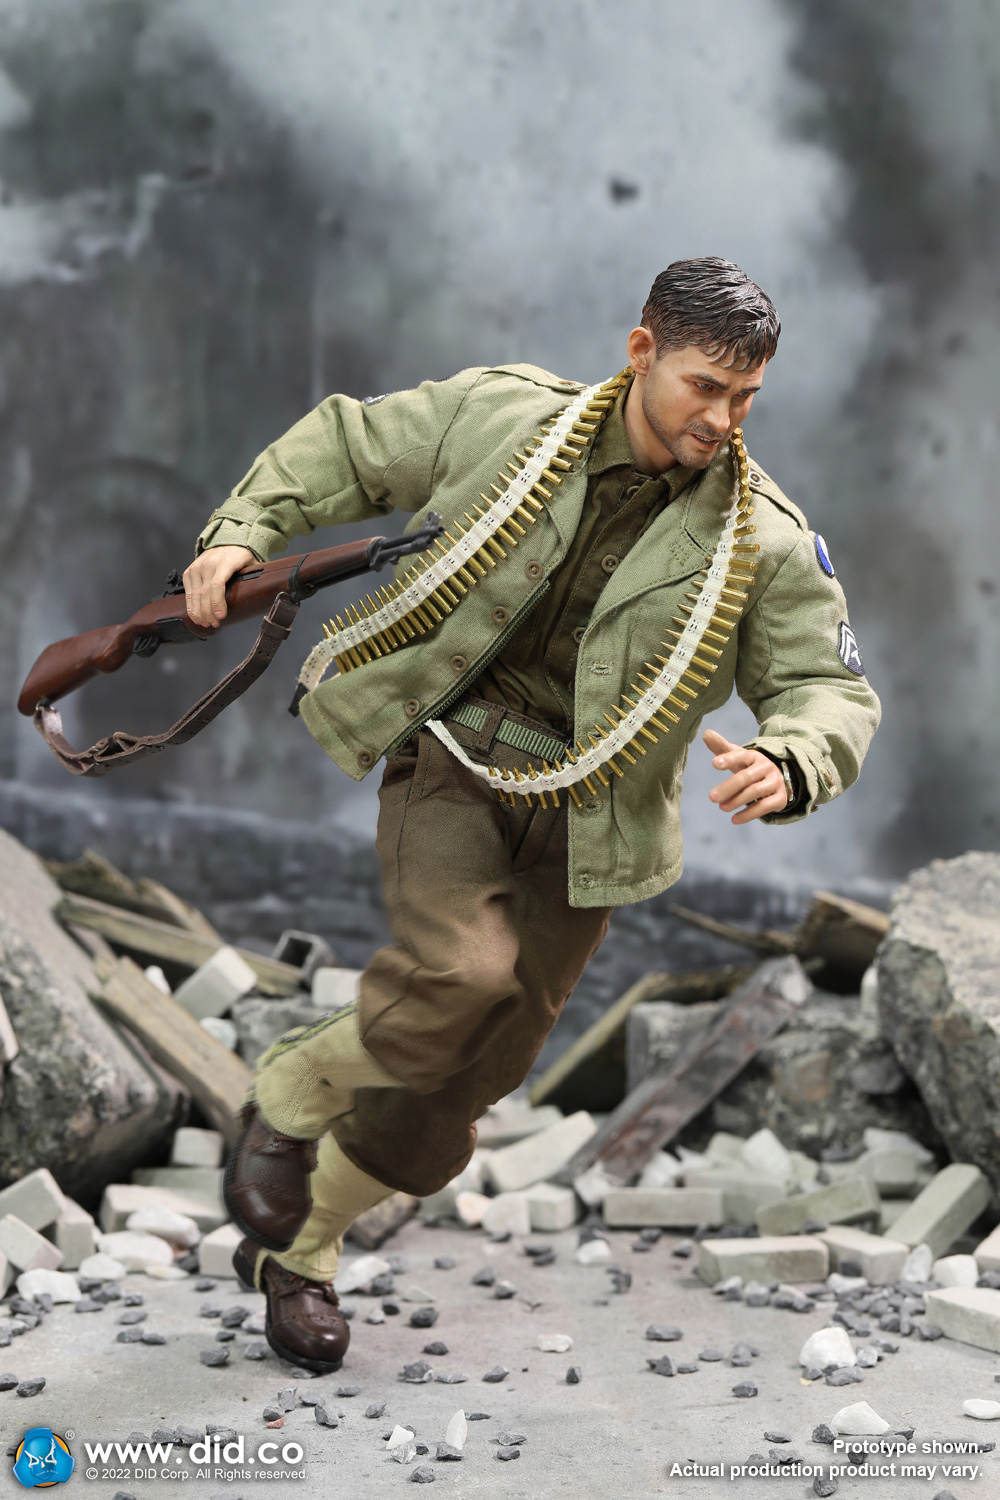 did - NEW PRODUCT: DiD: A80156 WWII US 29th Infantry Technician – Corporal Upham   7608